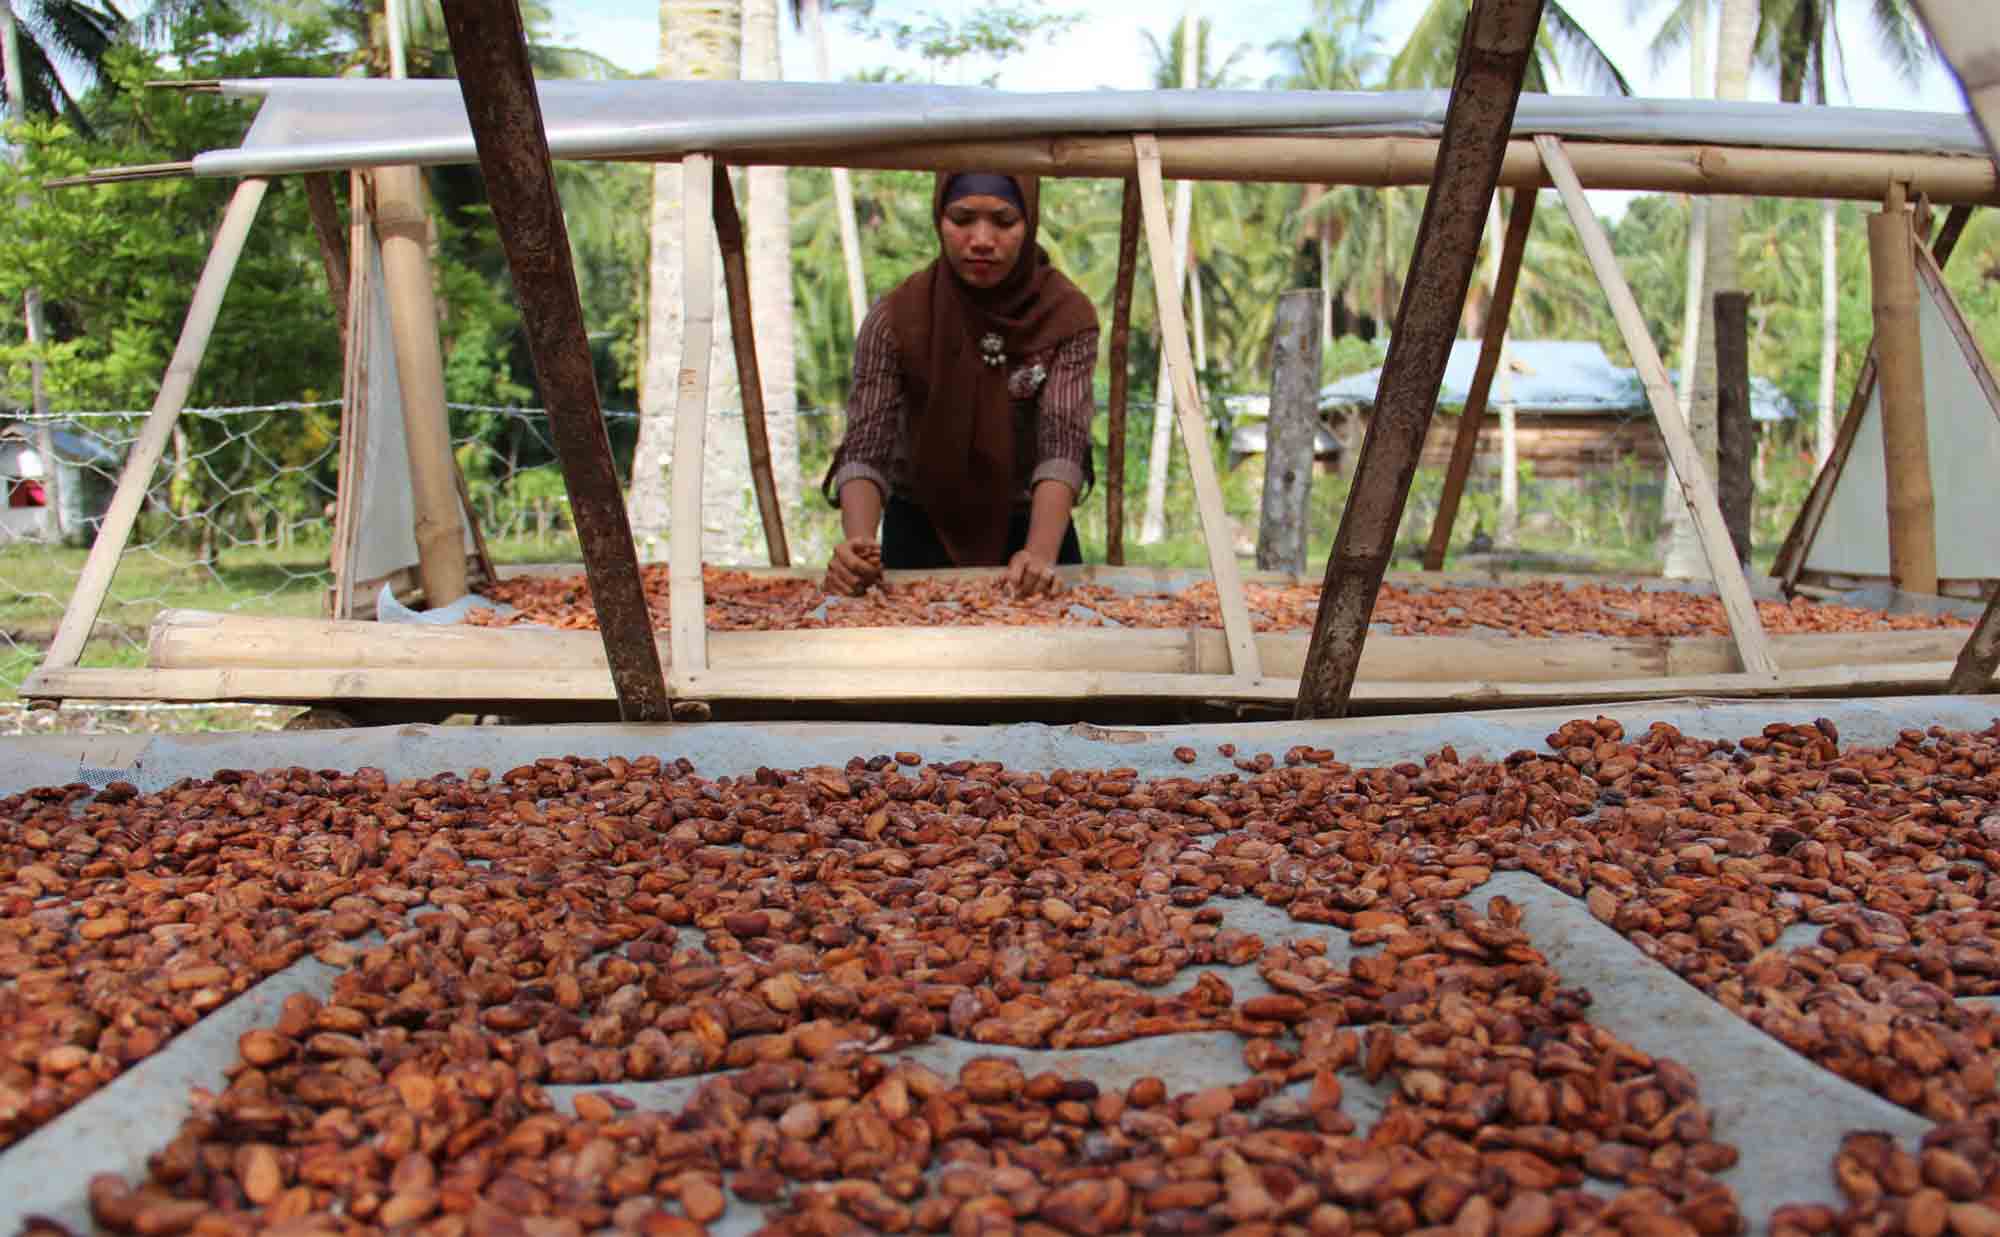 Swisscontact Improves Cocoa Farmers' Standards Through the Public-Private Development Partnership Program (PPDP) in Indonesia